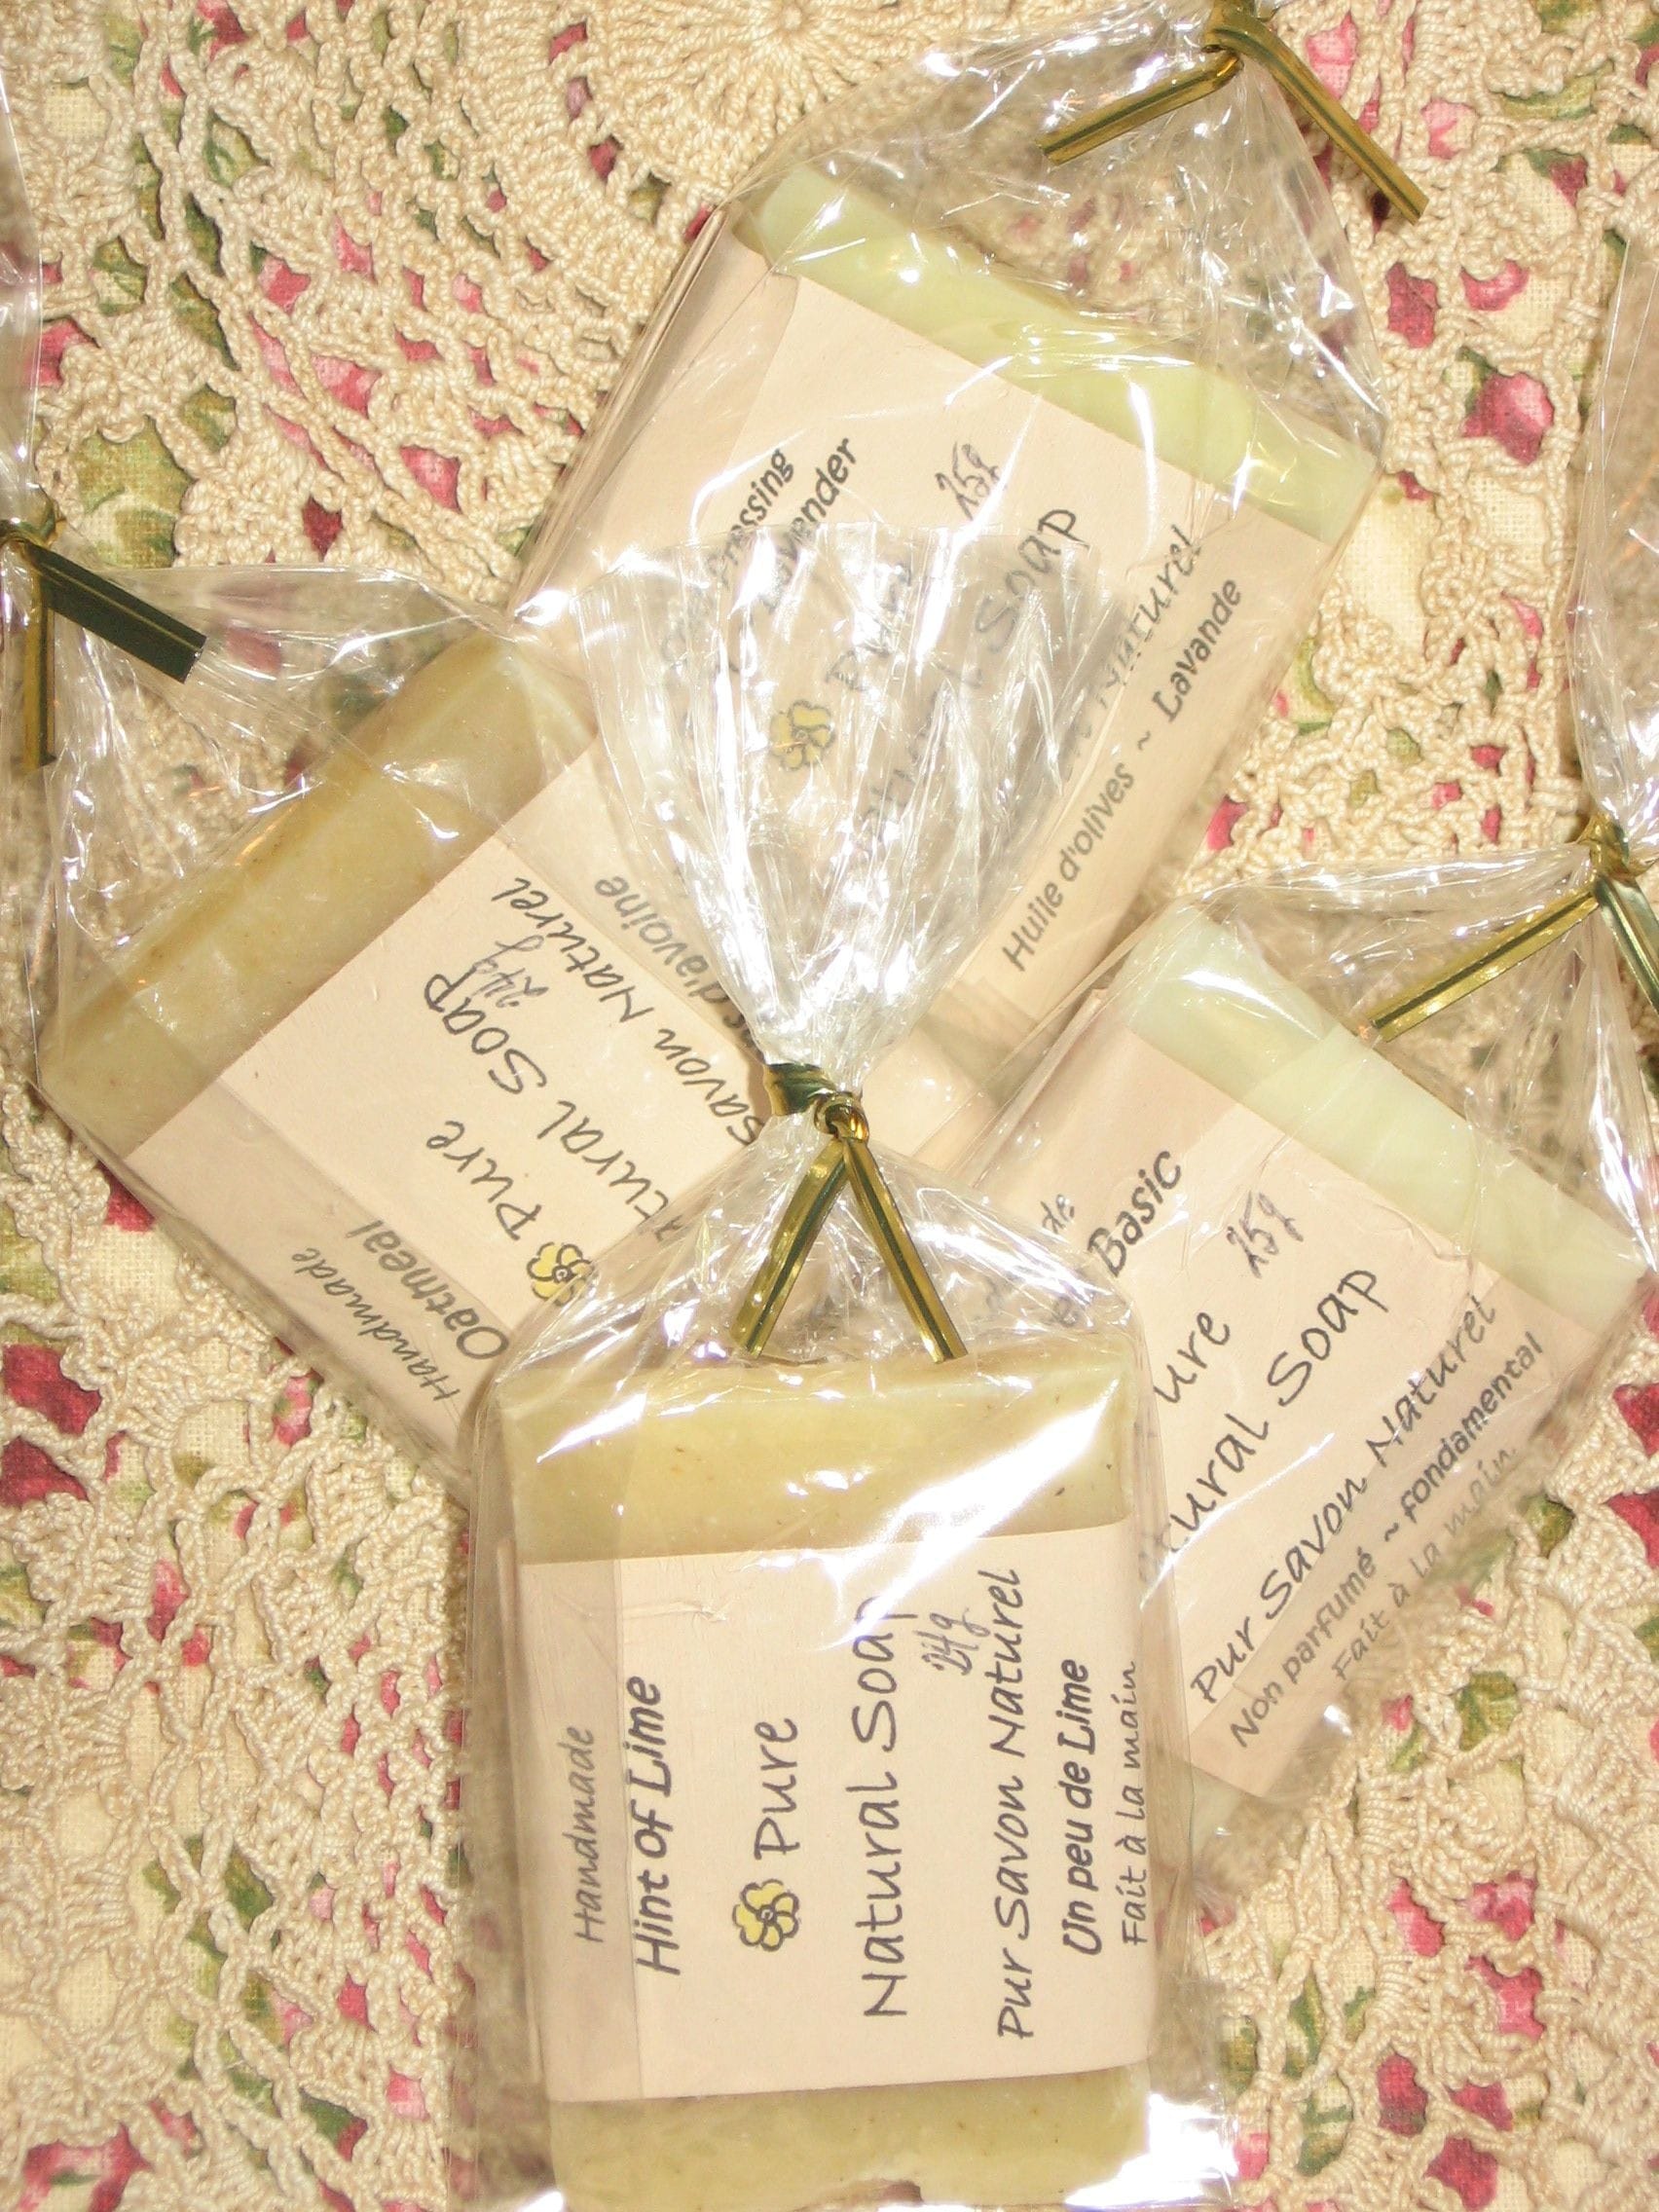 We make reasonably priced all natural soap favours in Canada for bridal showers, weddings, baby showers, birthdays, celebrations and special events.